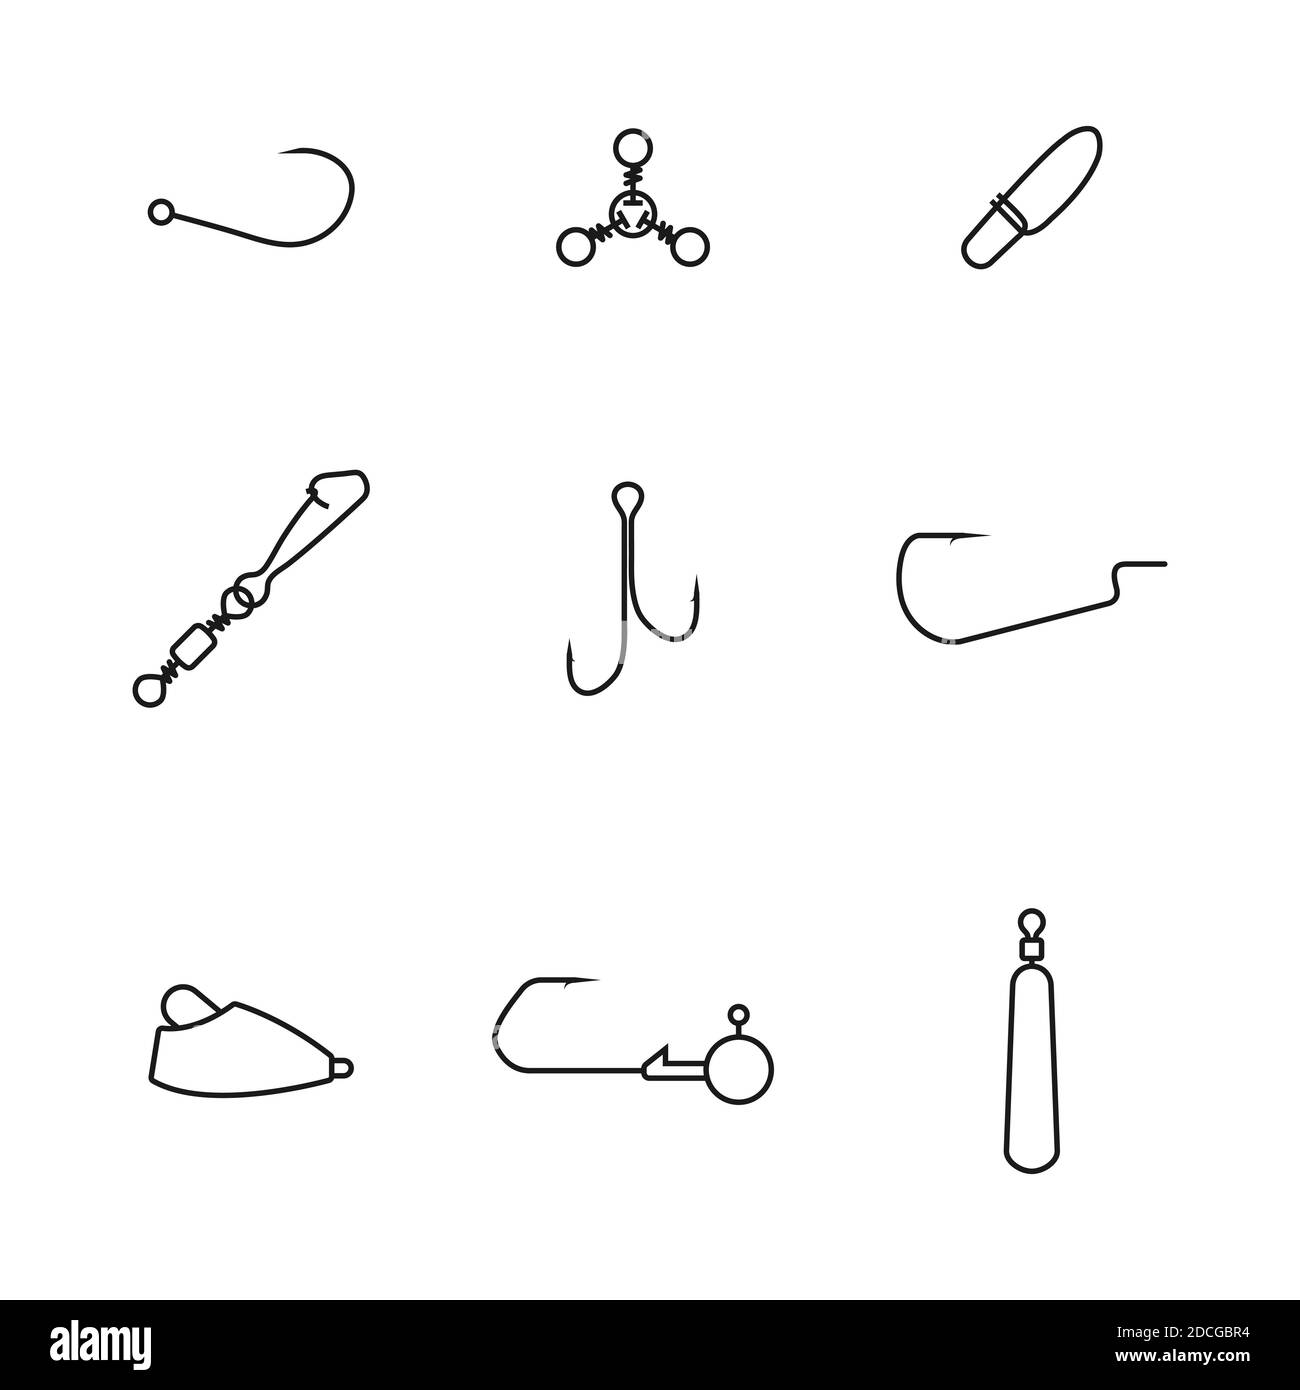 Set of spinning fishing accessories and tackles from thin lines. Various jig heads, lead sinkers, hooks, snaps hooked and swivels, vector illustration Stock Vector